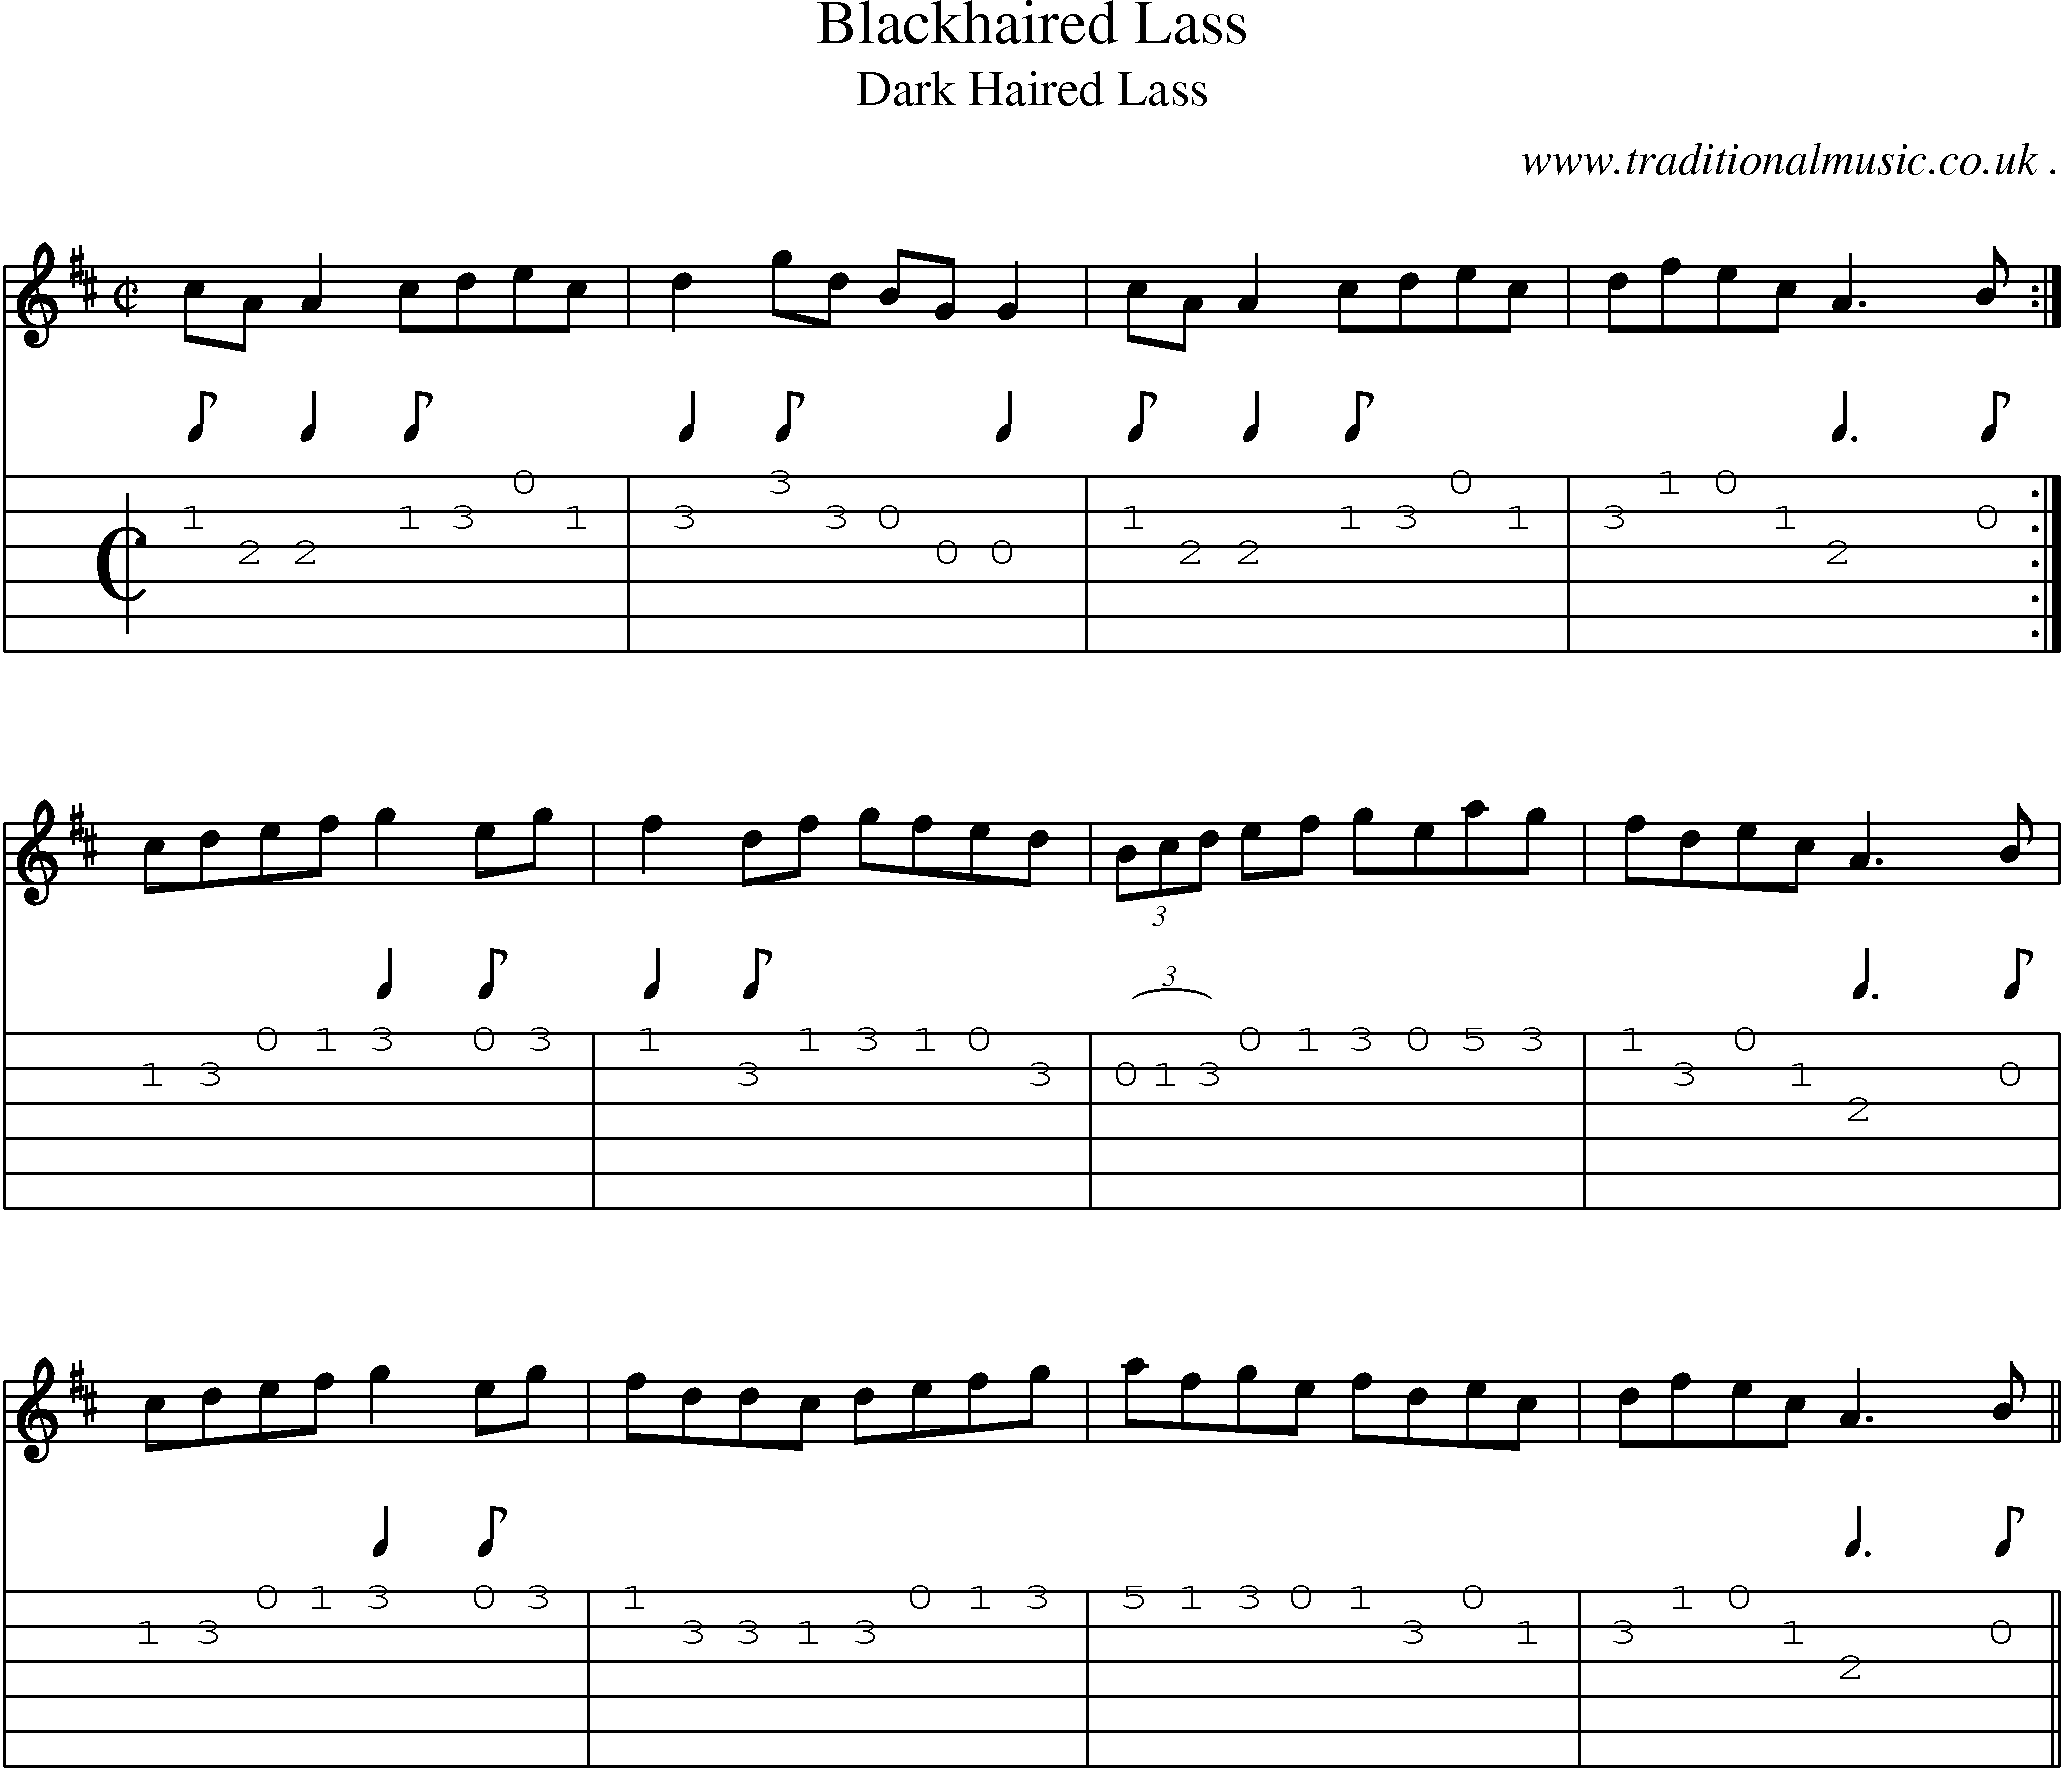 Sheet-Music and Guitar Tabs for Blackhaired Lass